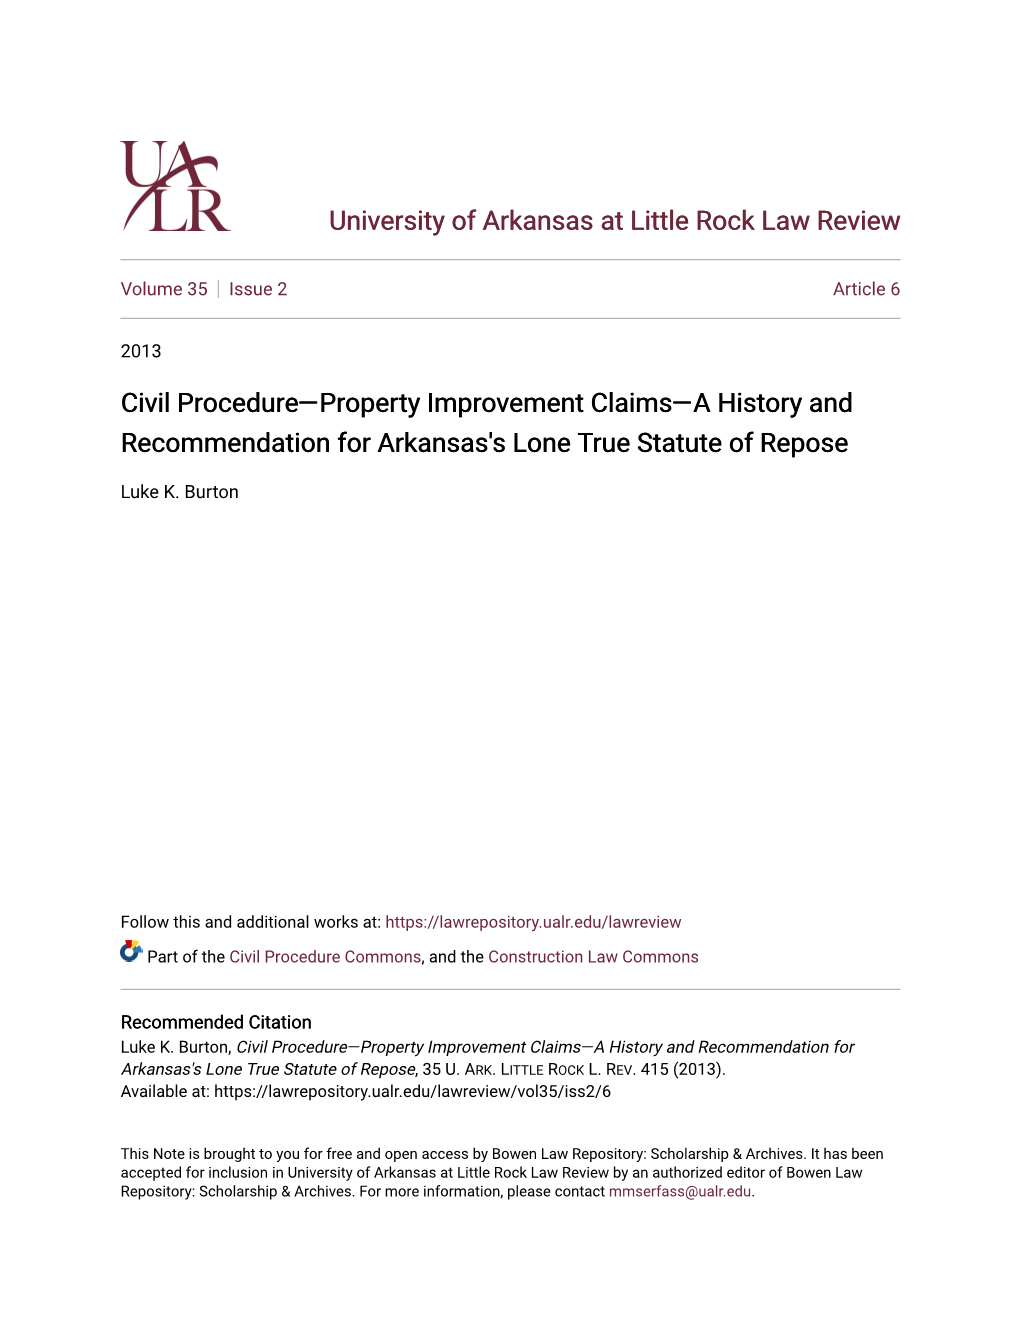 Civil Procedure—Property Improvement Claims—A History and Recommendation for Arkansas's Lone True Statute of Repose